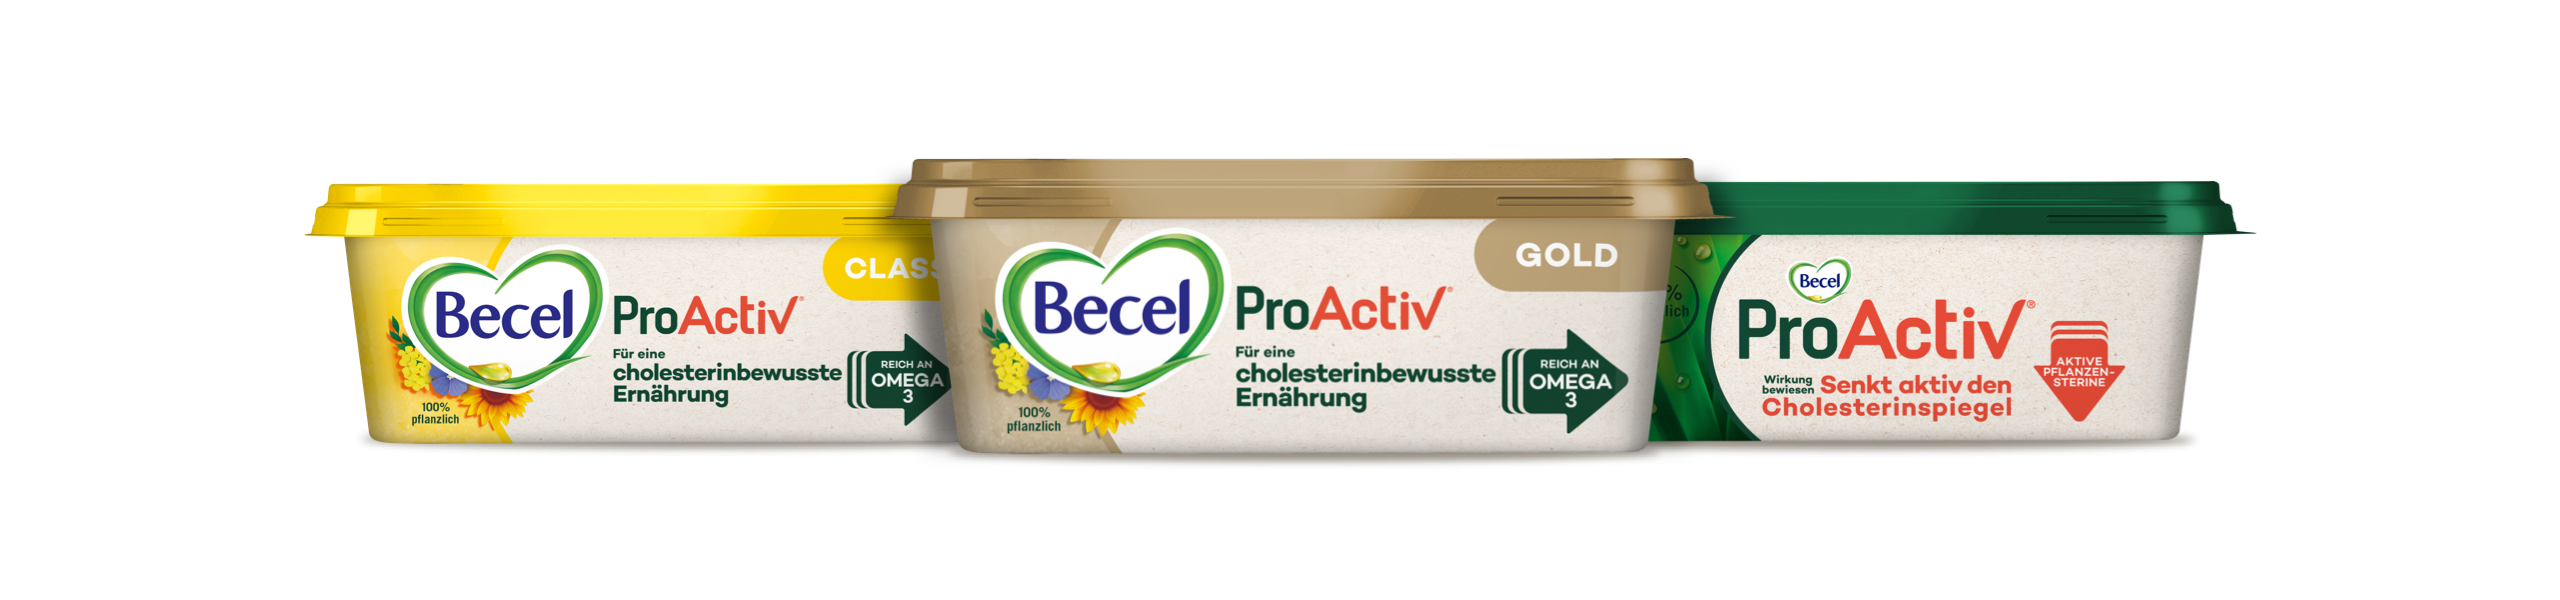 Becel ProActiv products